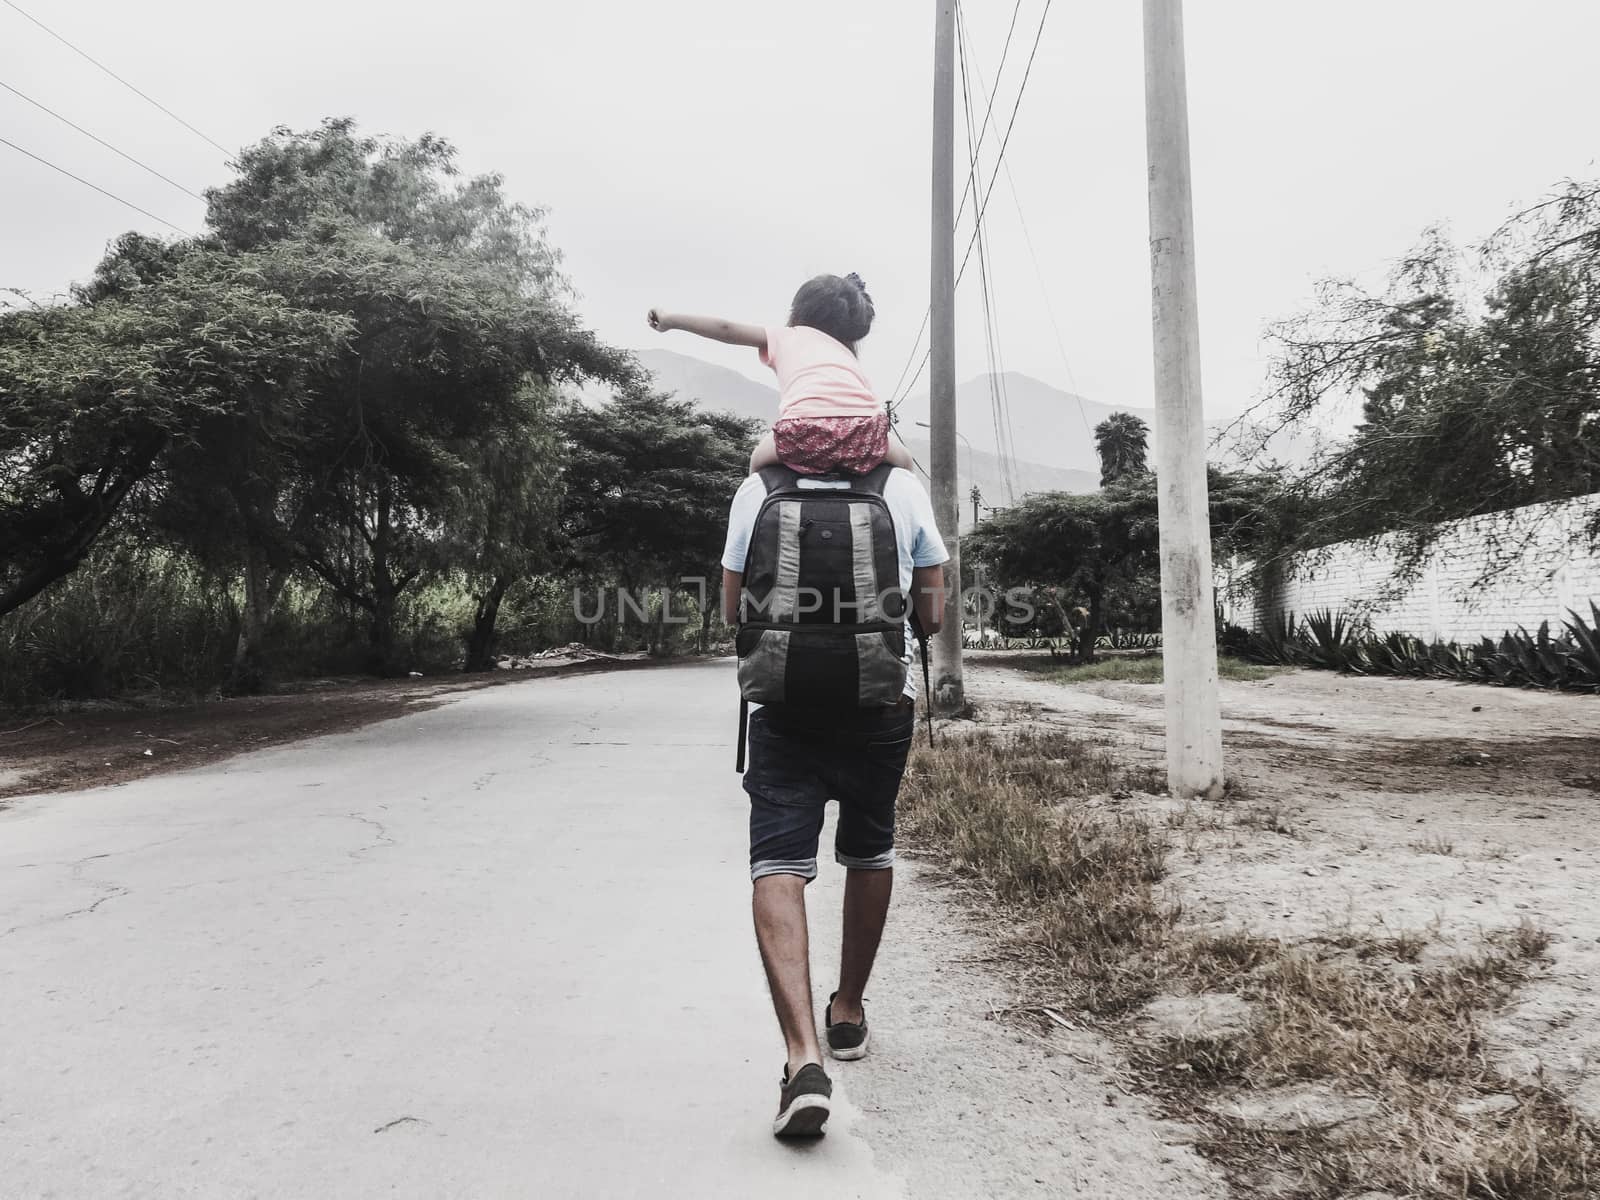 Moment together of father and daughter, the little daughter on the shoulders of dad, walking together